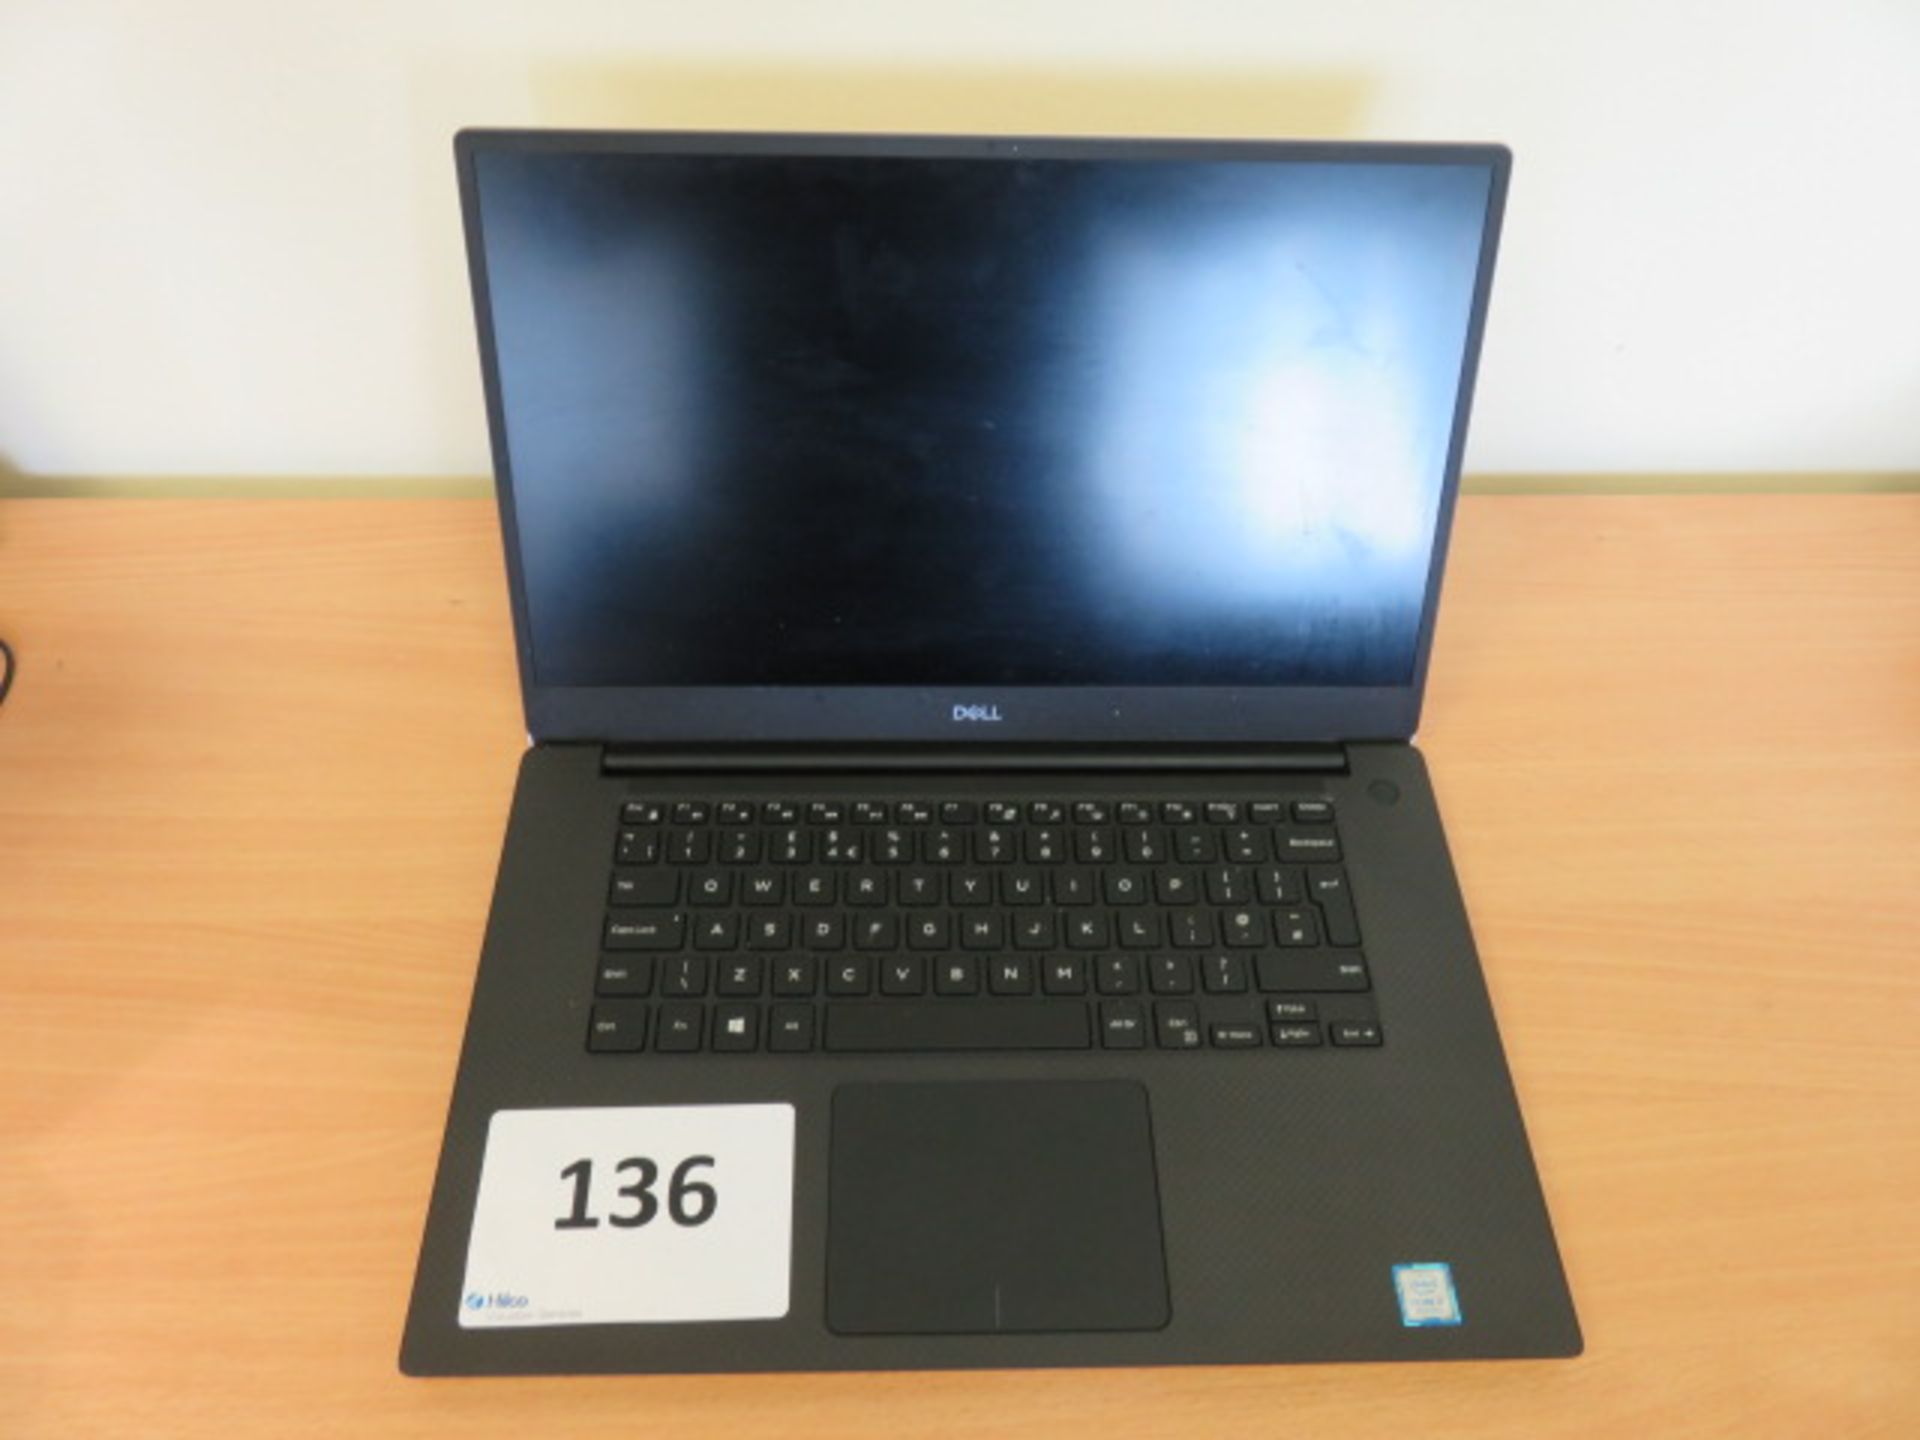 Dell XPS 15 7590 15in Core i7 9th Gen Laptop Serial No. 5R5W433 (2020) (Asset No. LTW-477)